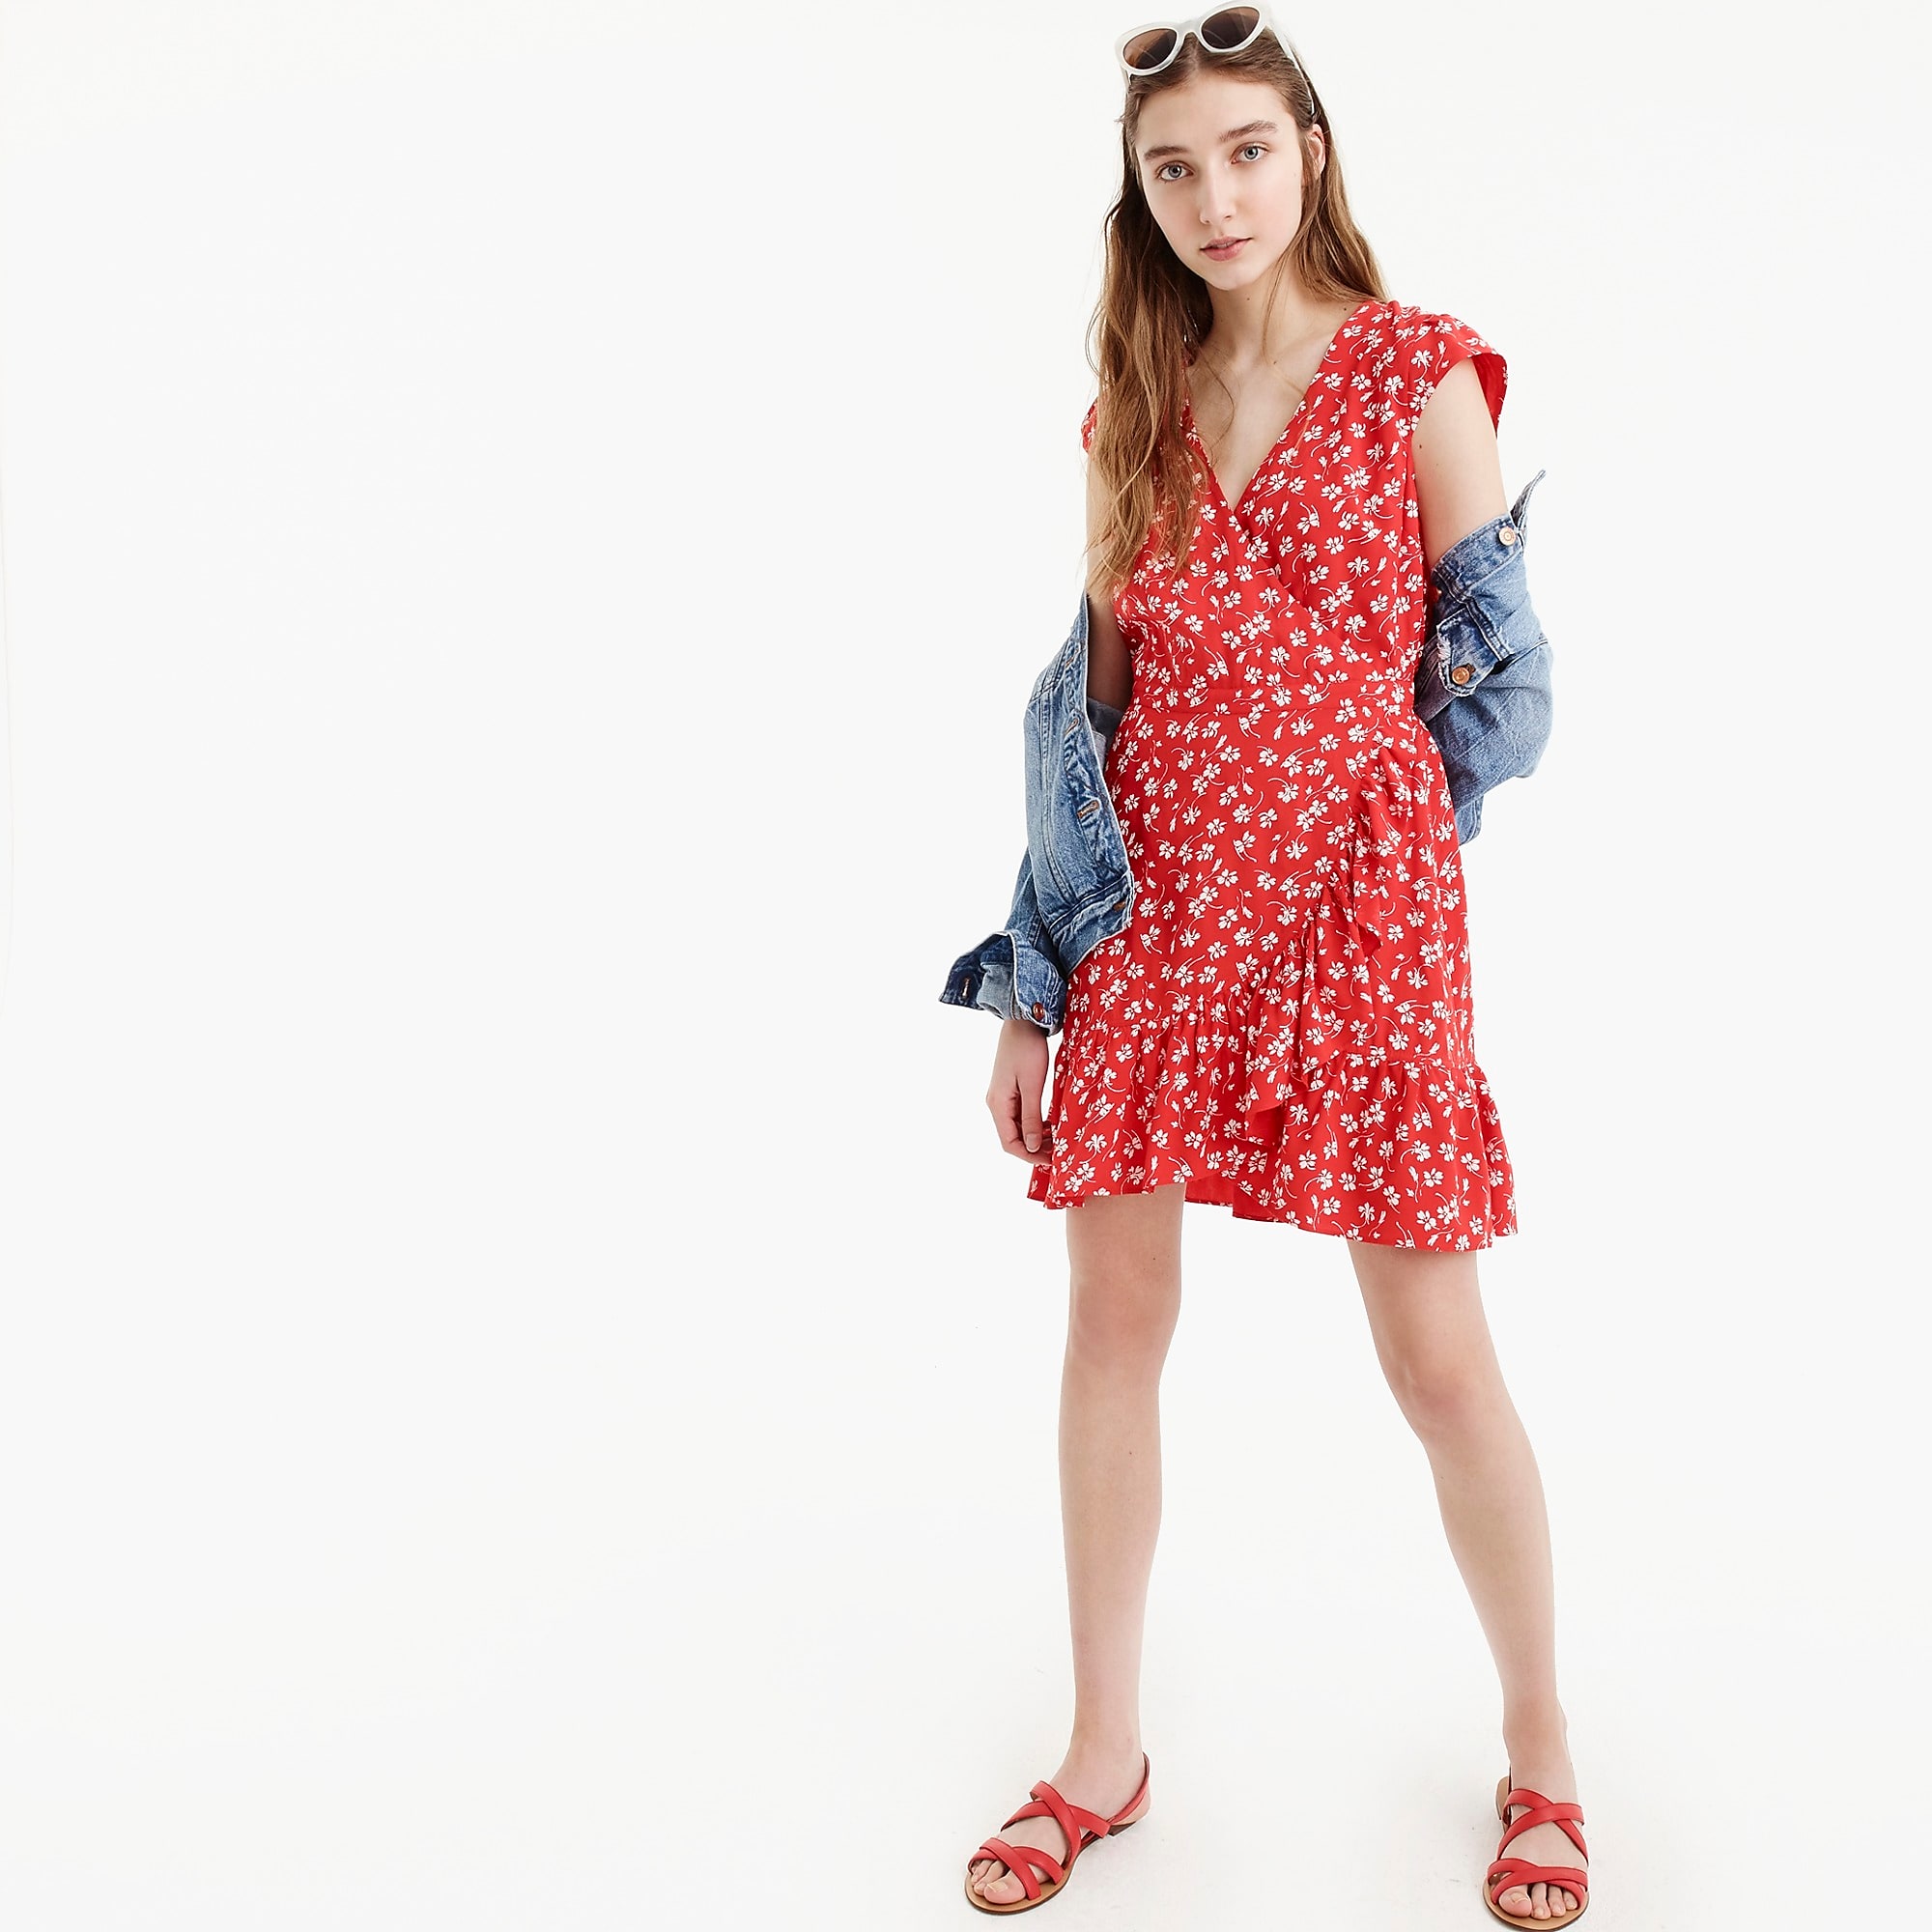 Memorial Day Sales J.Crew: 40% off all purchases with code GETAWAY